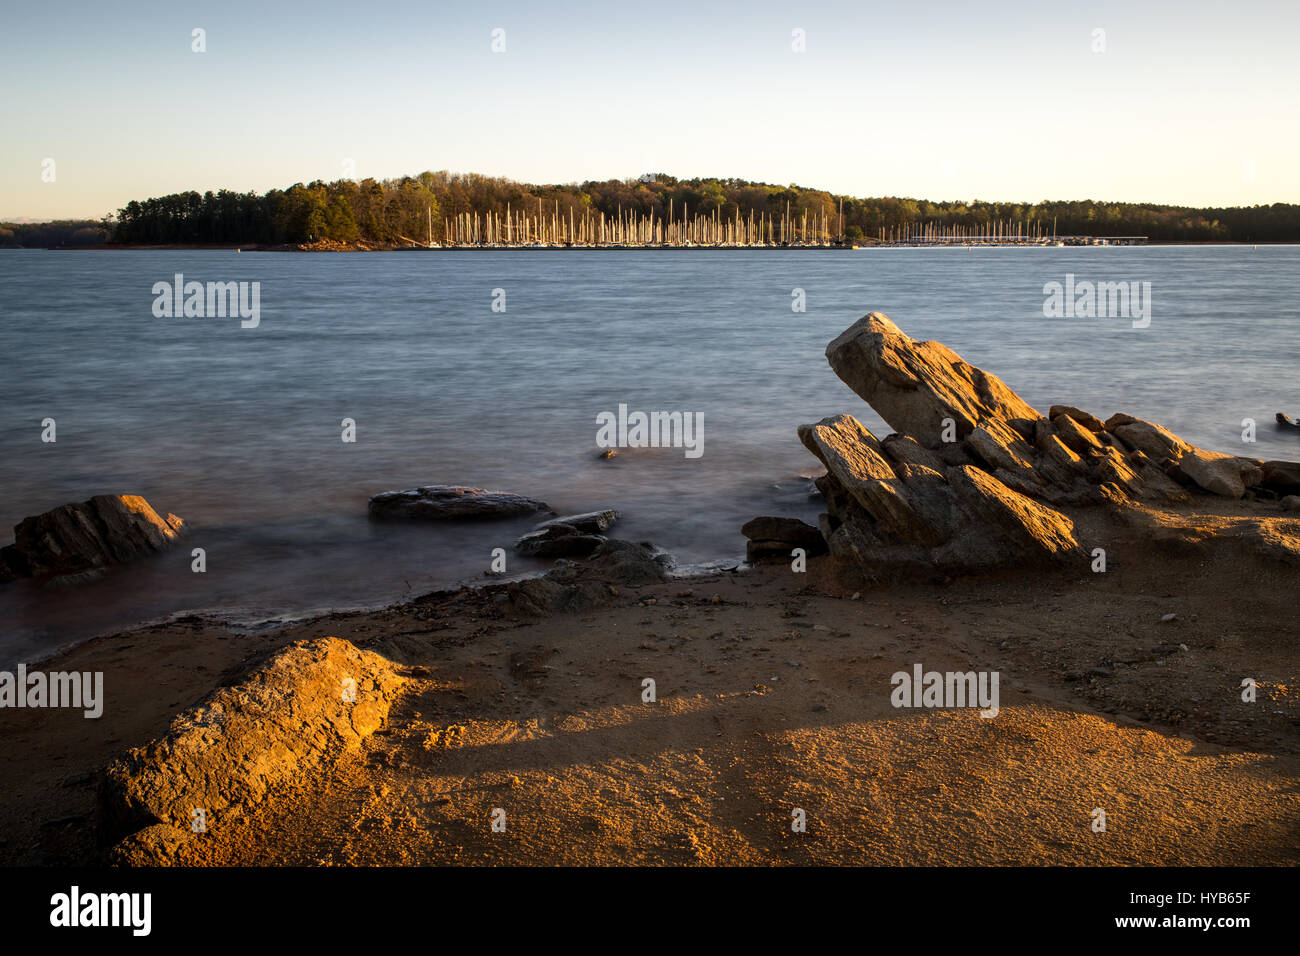 This image was taken during a period of very low water levels in Lake Lanier.  Federal Park is located in Flowery Branch, GA on Lake Lanier.  There are several amenities available at the park. Stock Photo